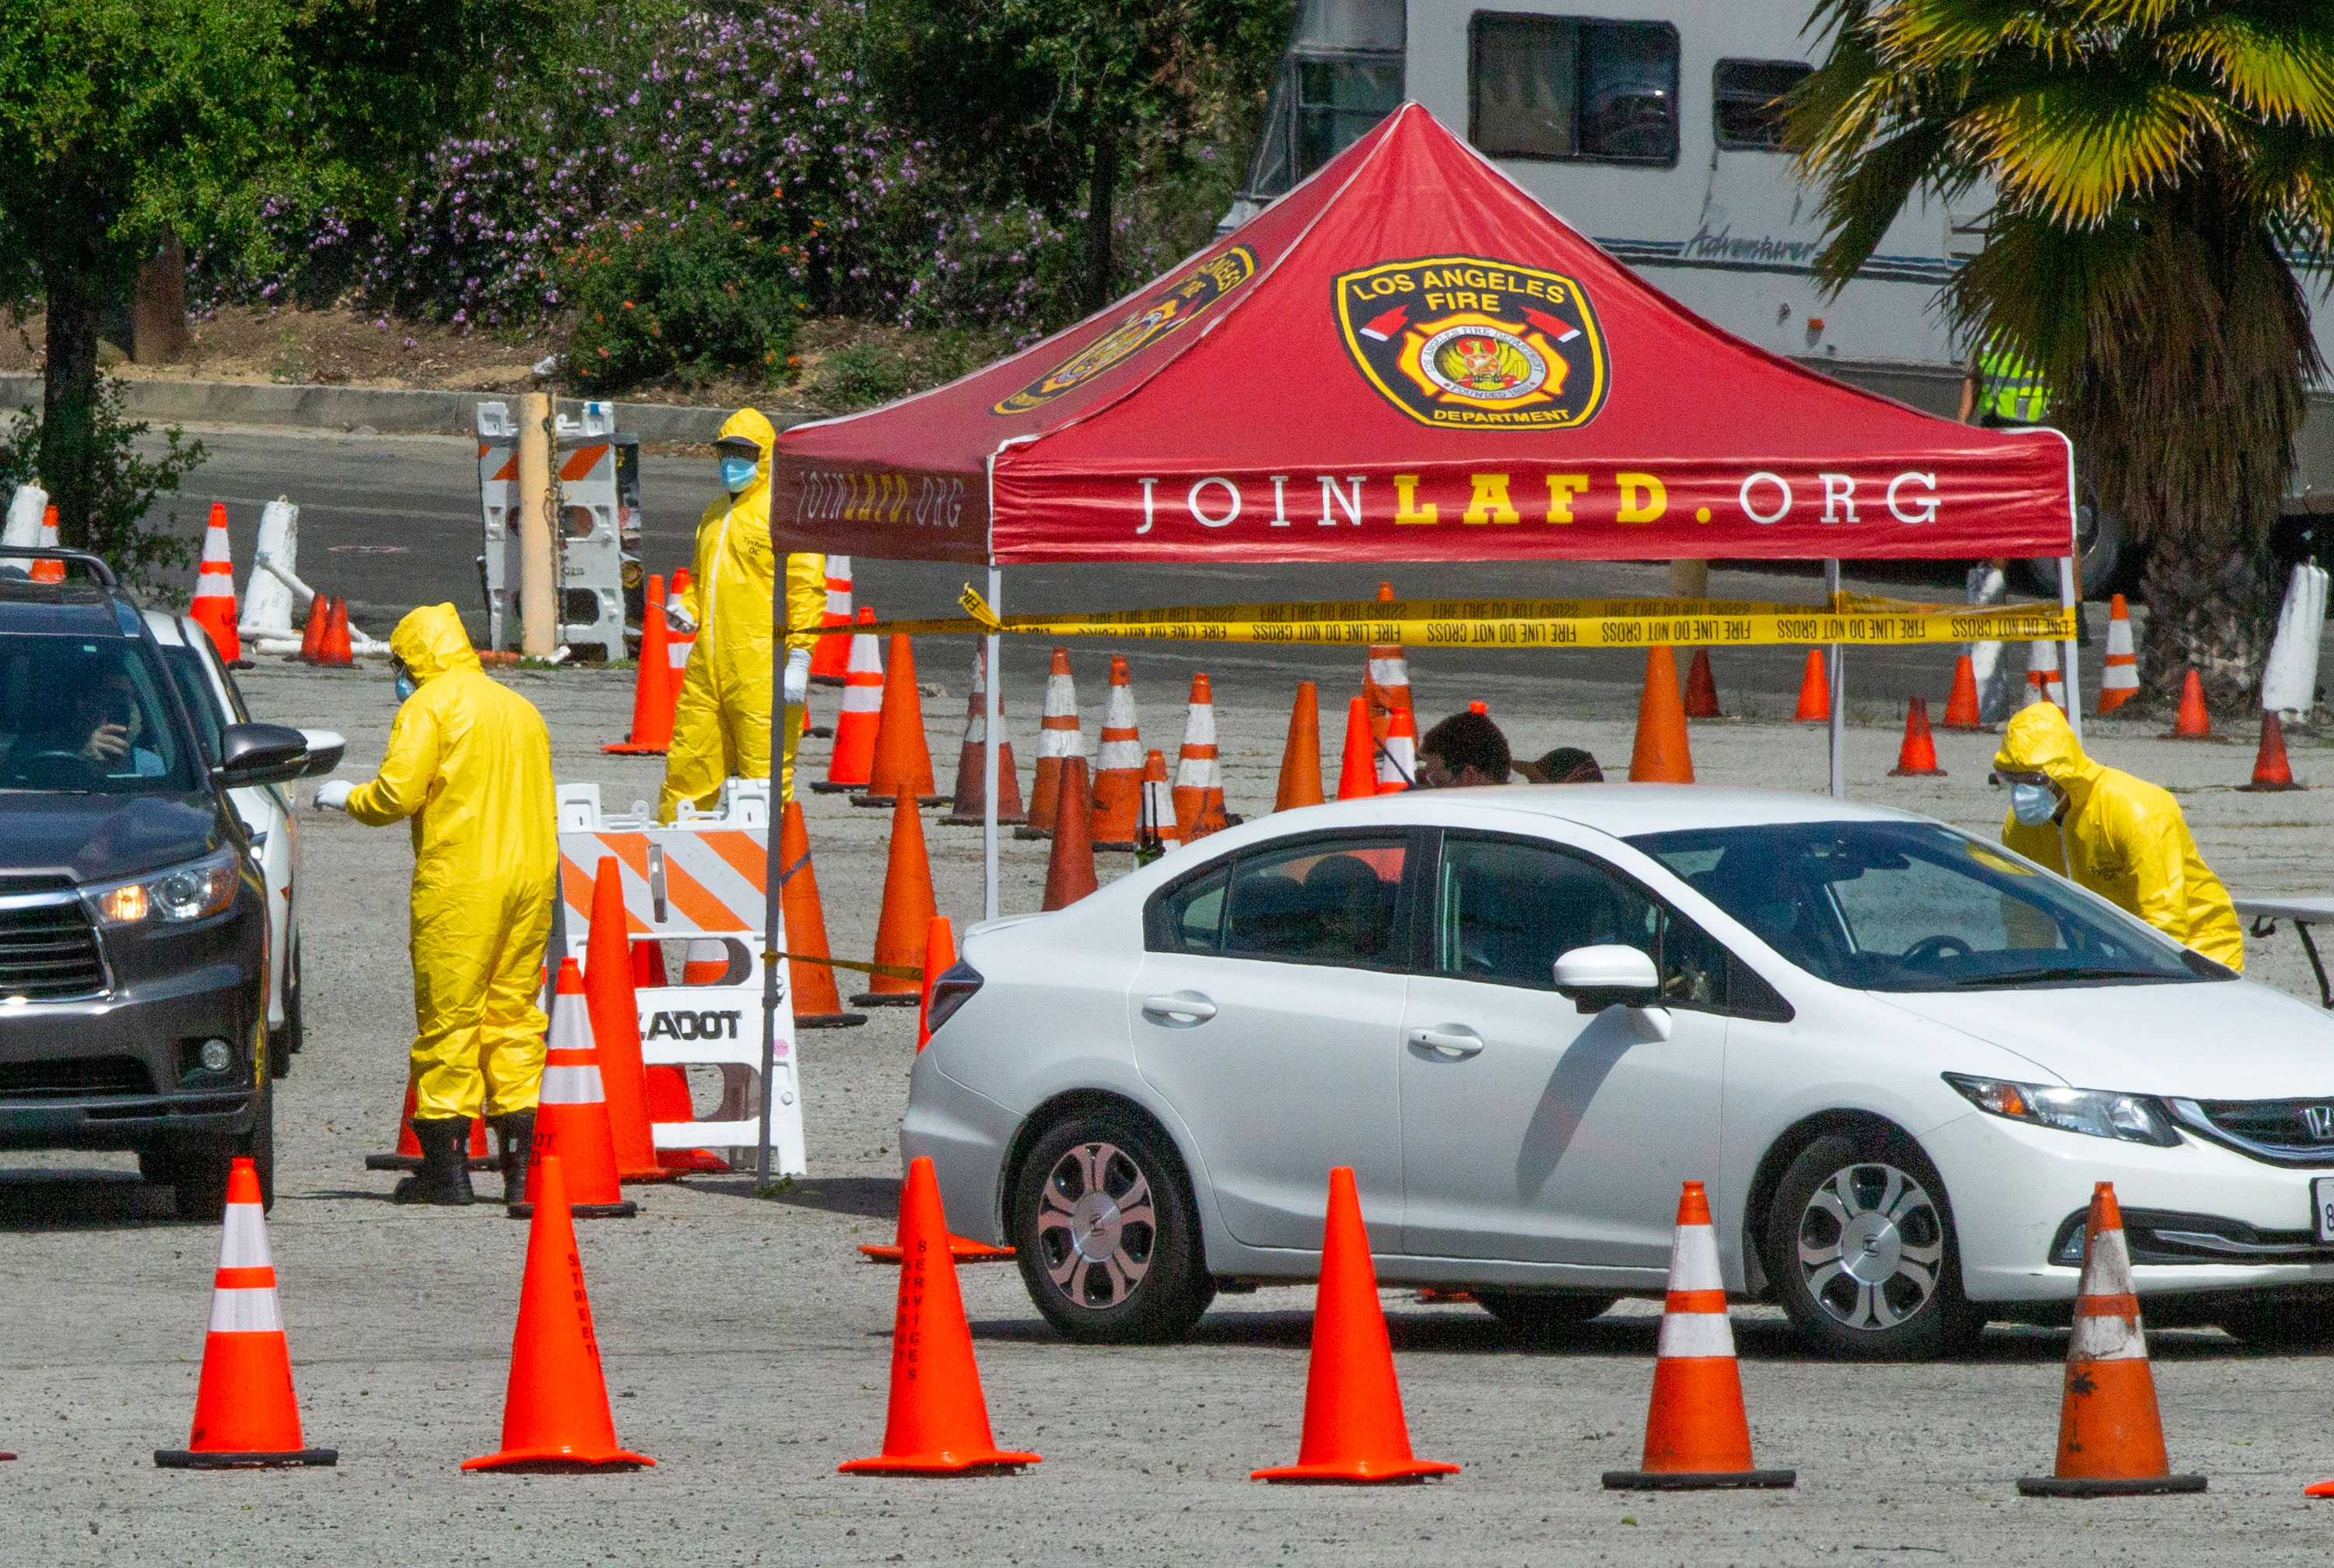 Los Angeles Fire Department officials wearing protective gear administer coronavirus tests at a drive-up testing site in Elysian Park, Los Angeles on April 2.